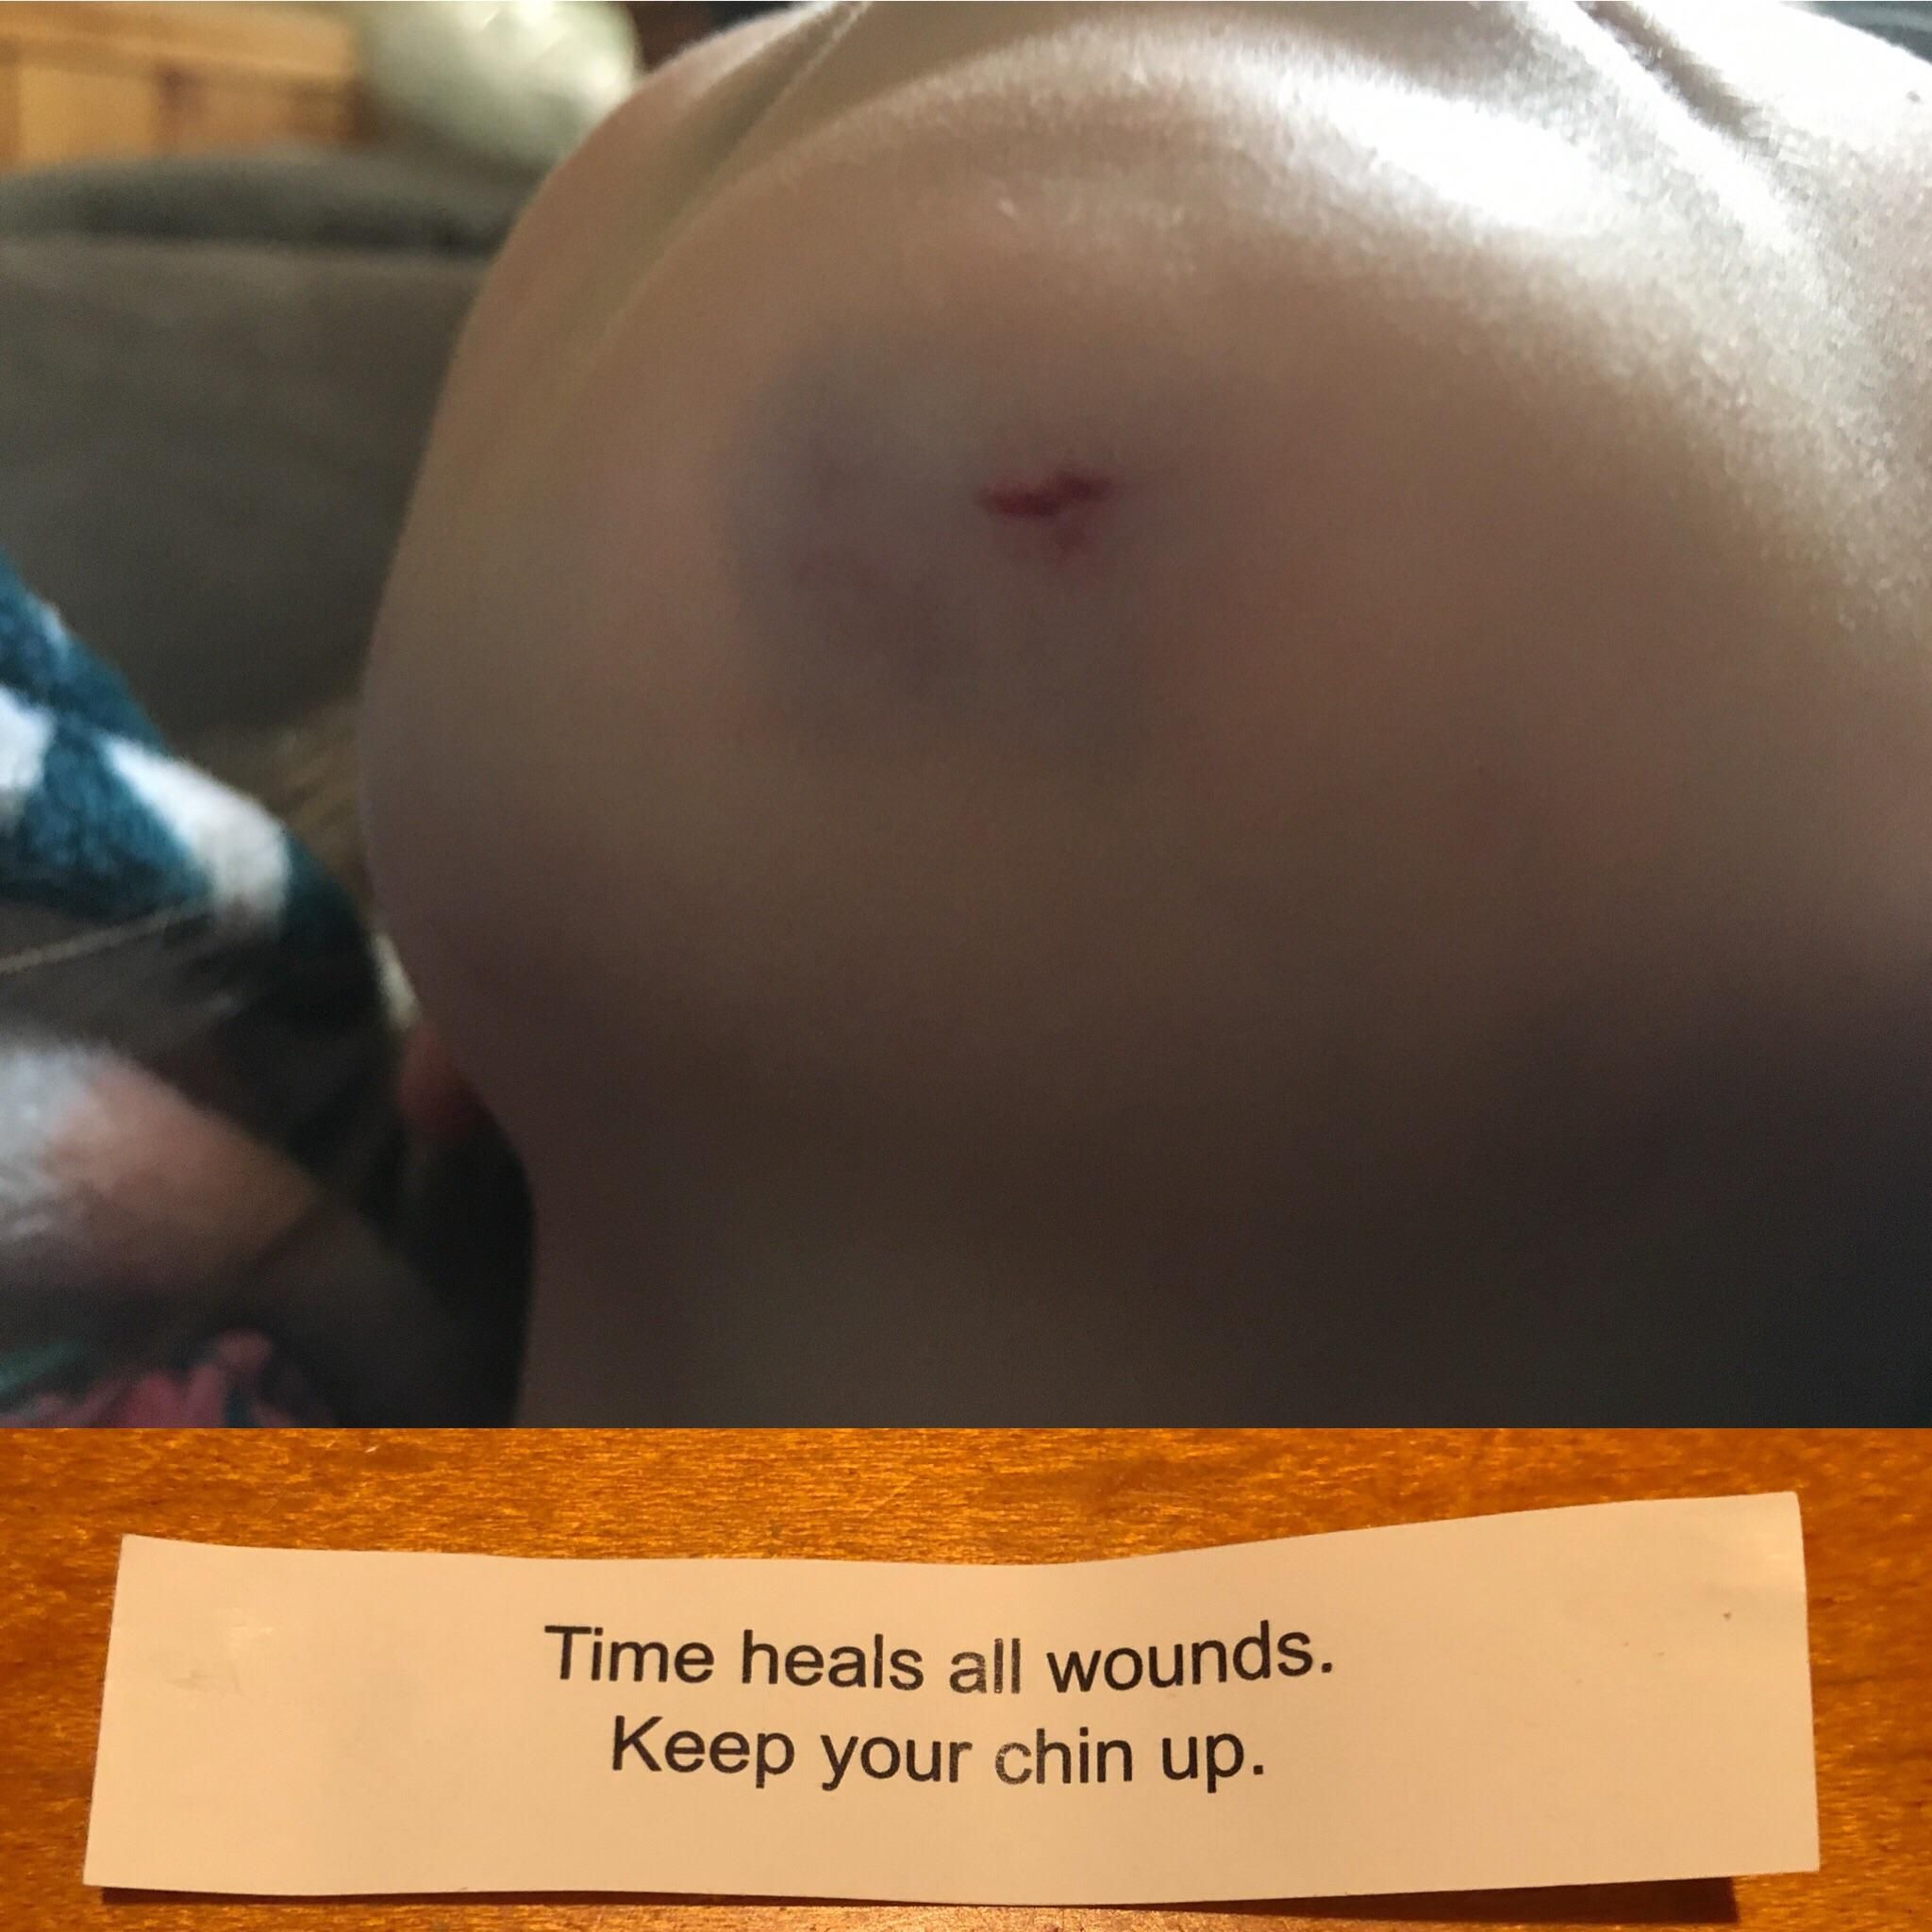 My daughter injured her chin today and at dinner received this fortune cookie.